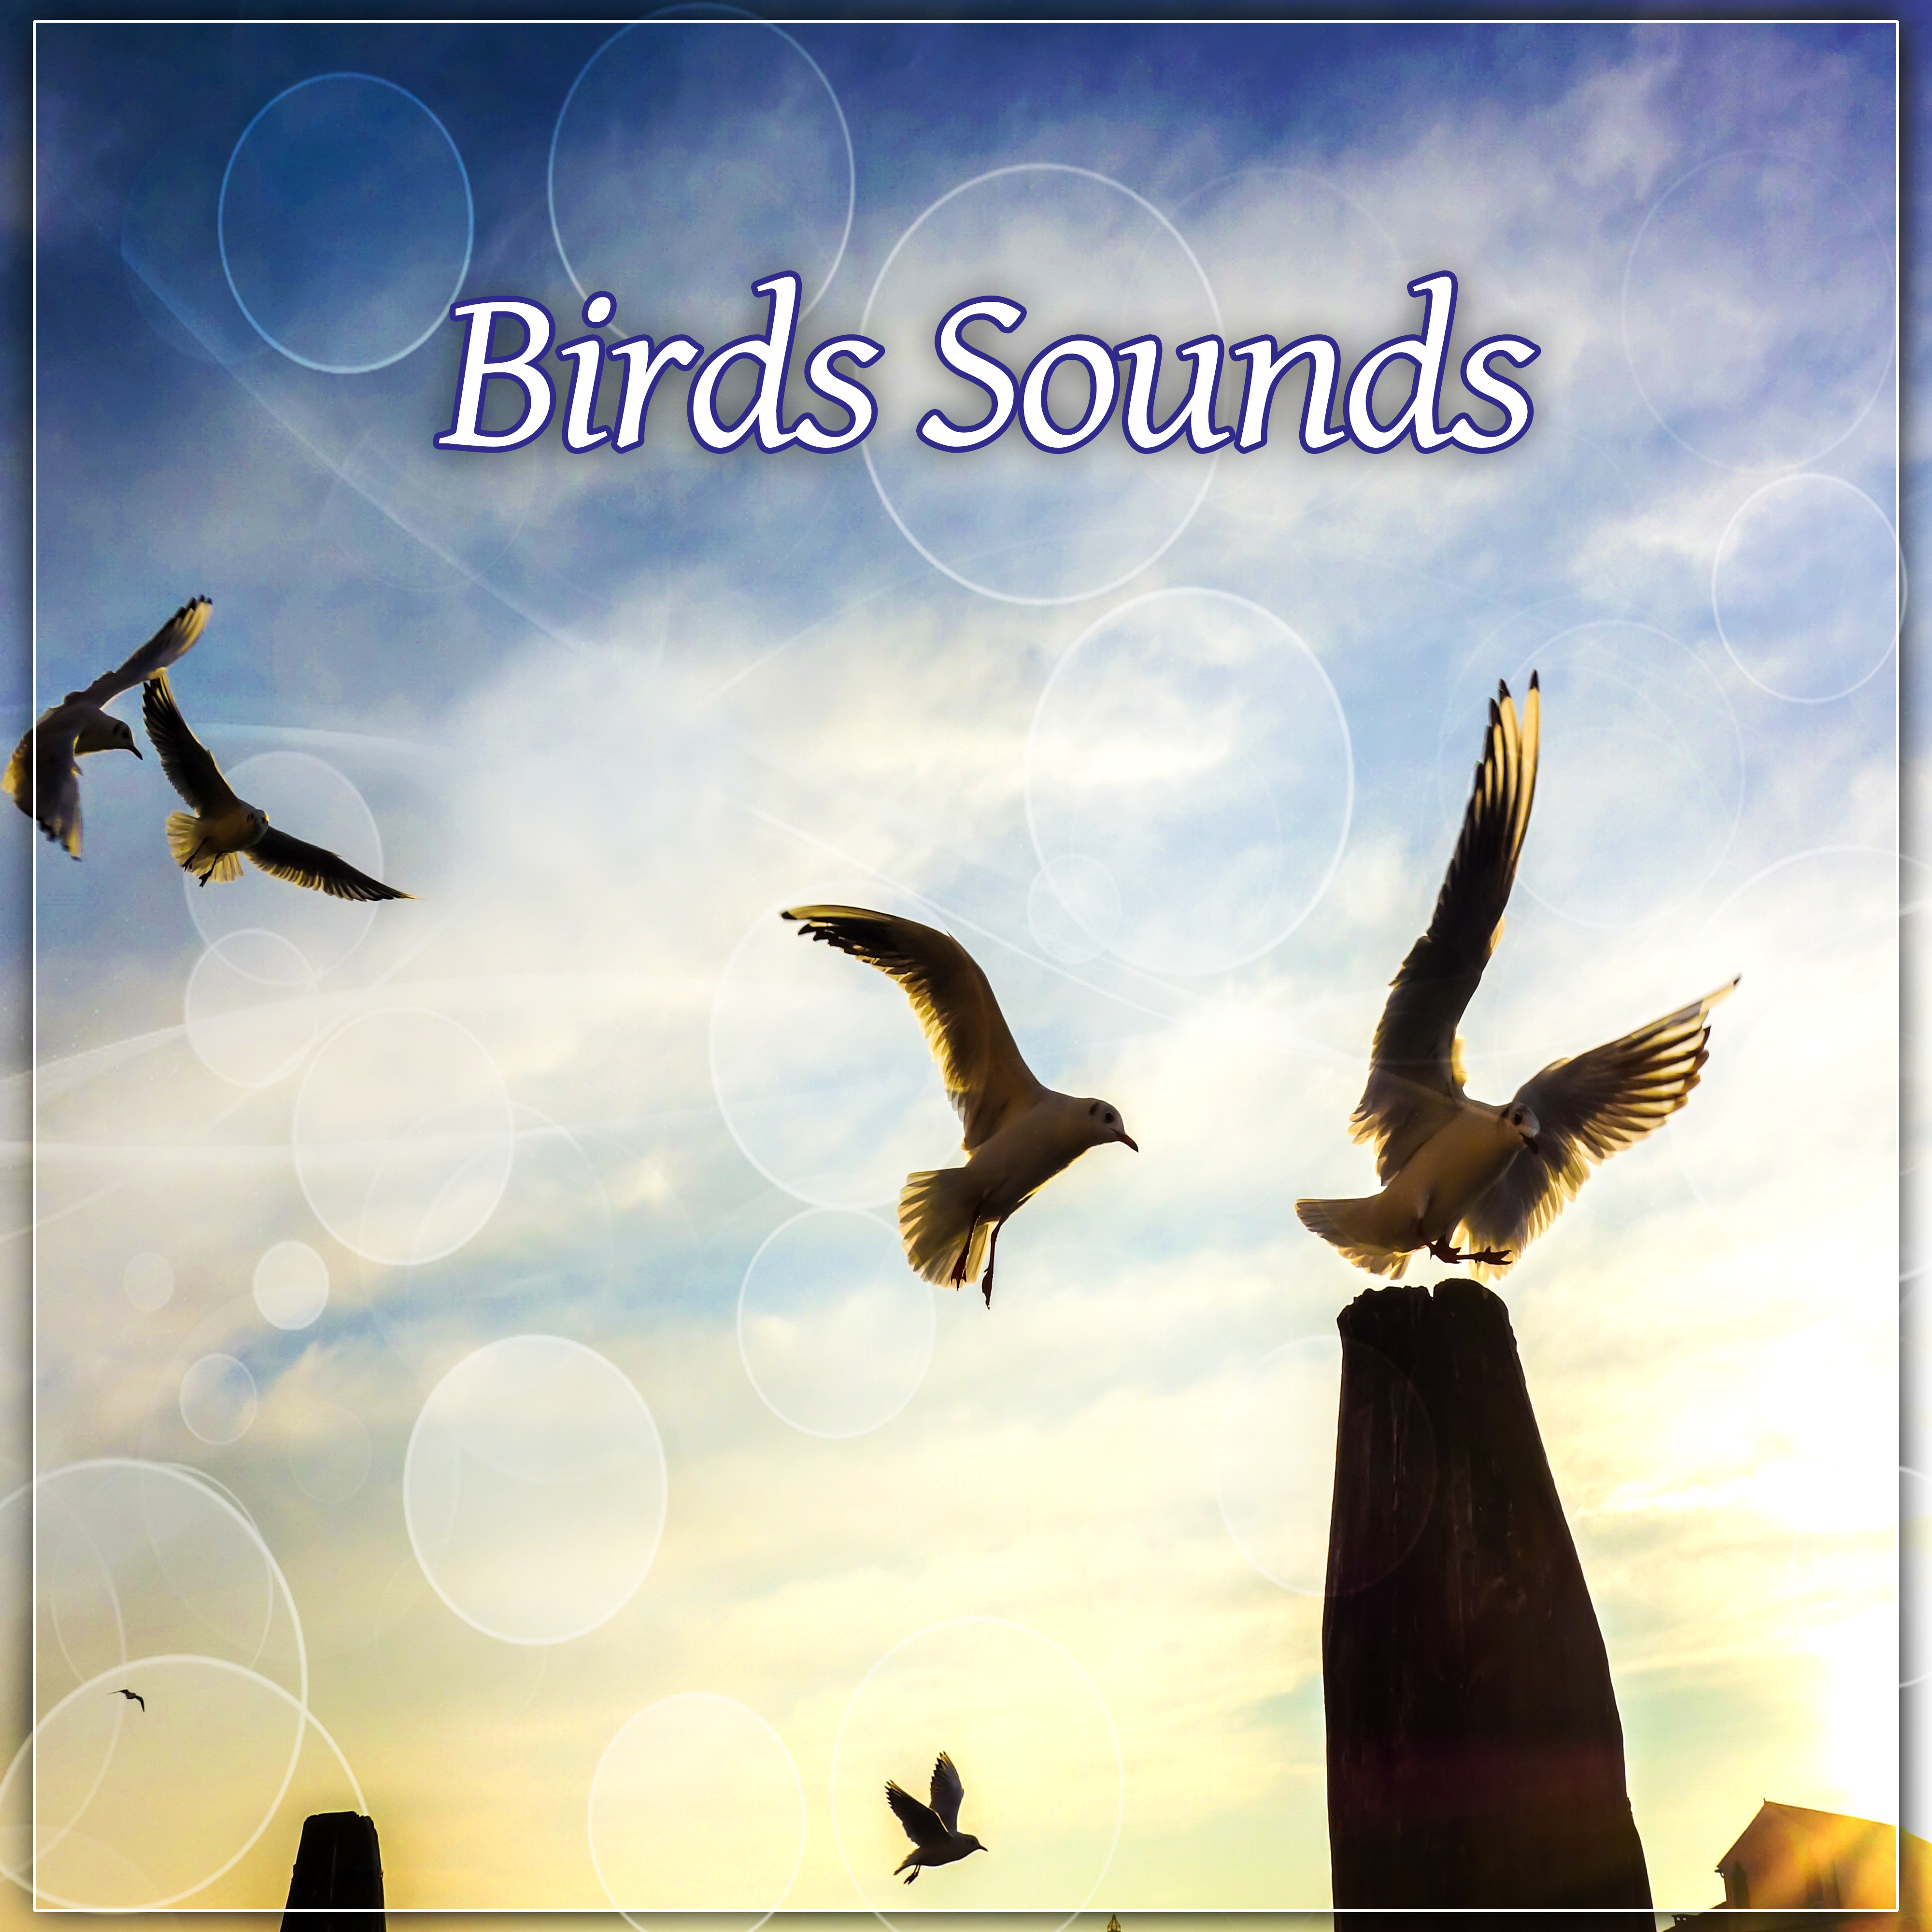 Birds Sounds – Fabulous Nature Sounds of Birds and Ocean Waves, Pure Relax, Best Musis for Spa, Massage, Wellness, Rest,  Peaceful Sounds of New Age Music